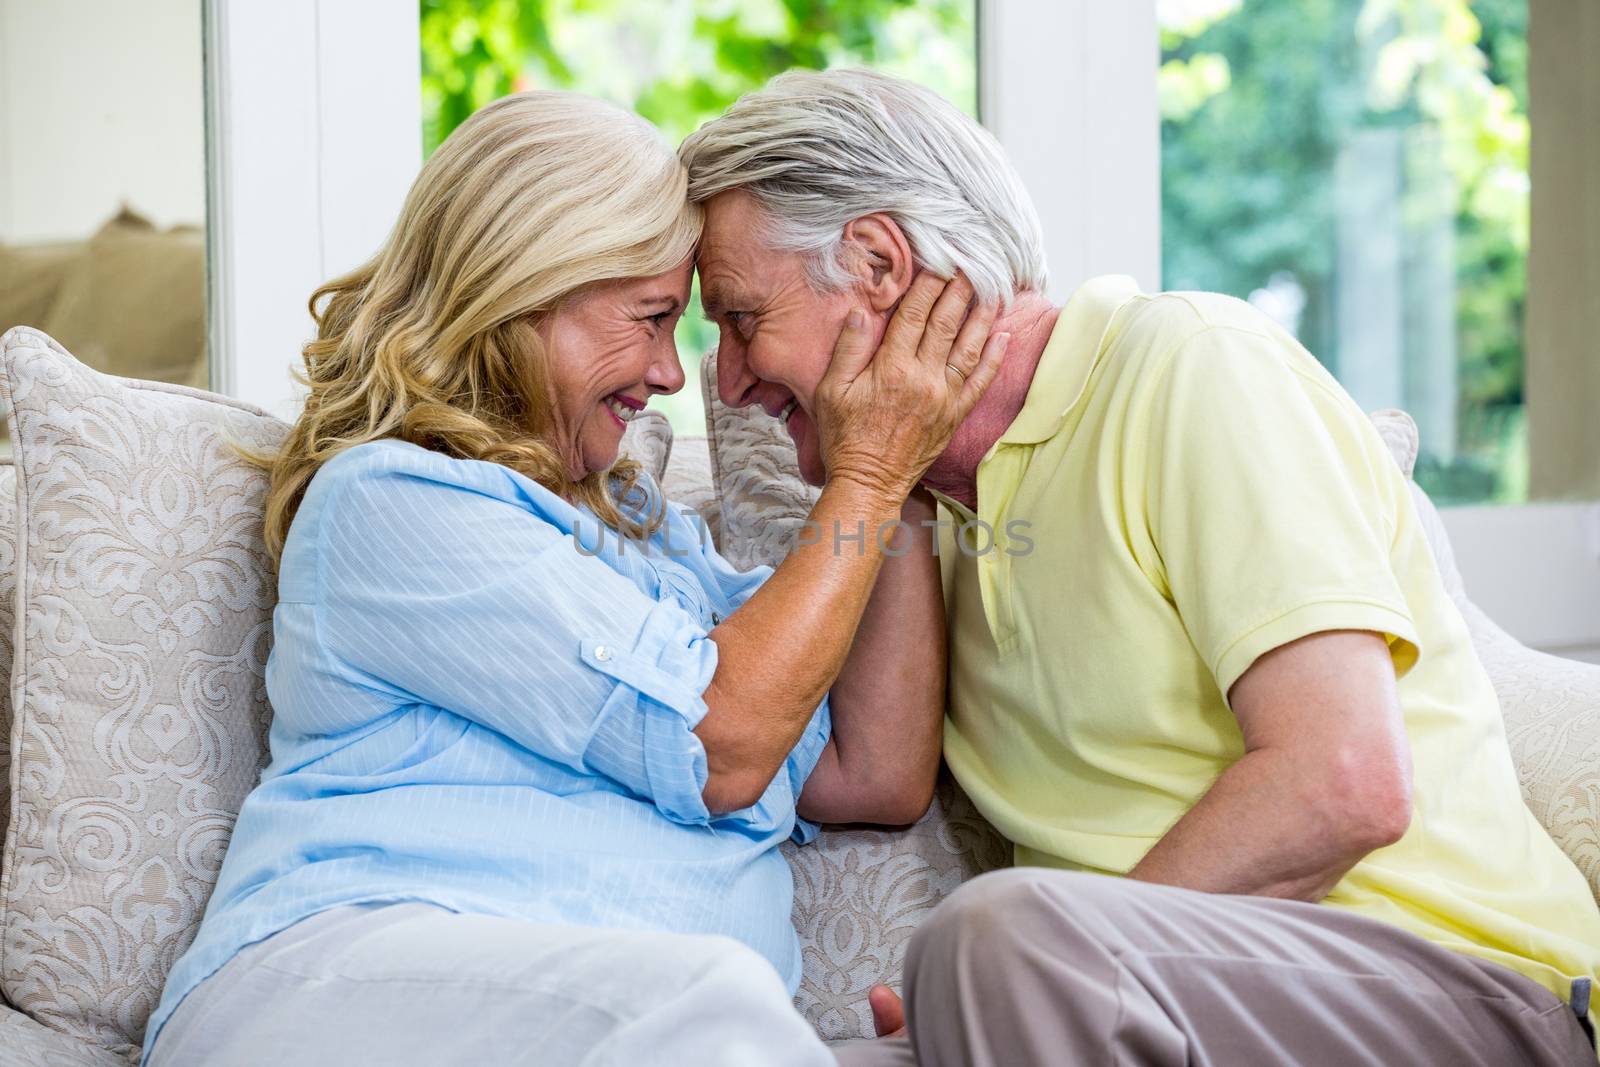 Romantic senior couple emracing in living room at home